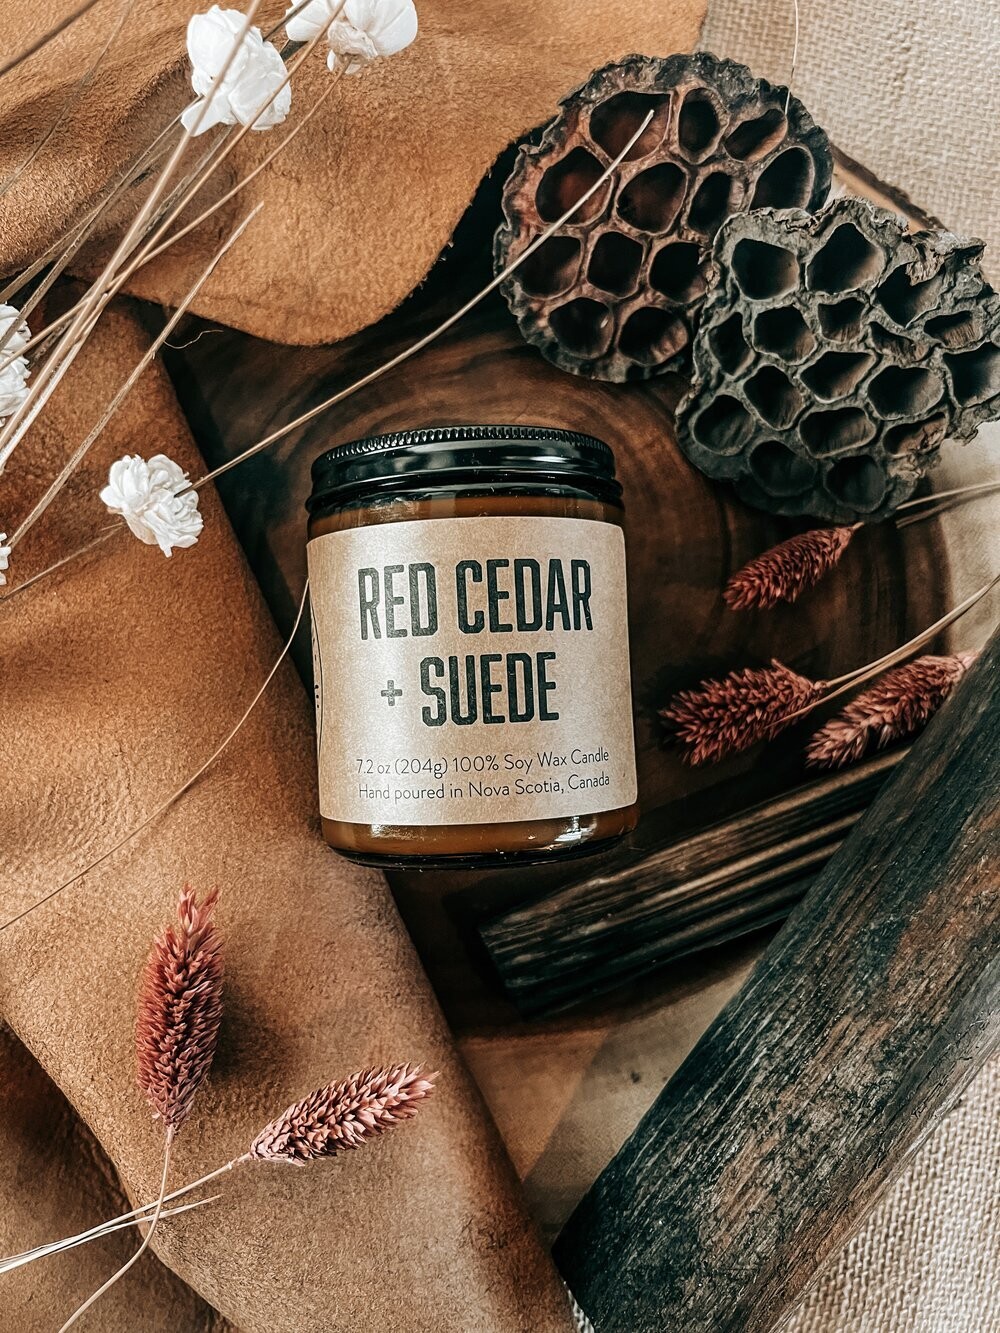 Red Cedar + Suede - Lawrencetown Candle Co